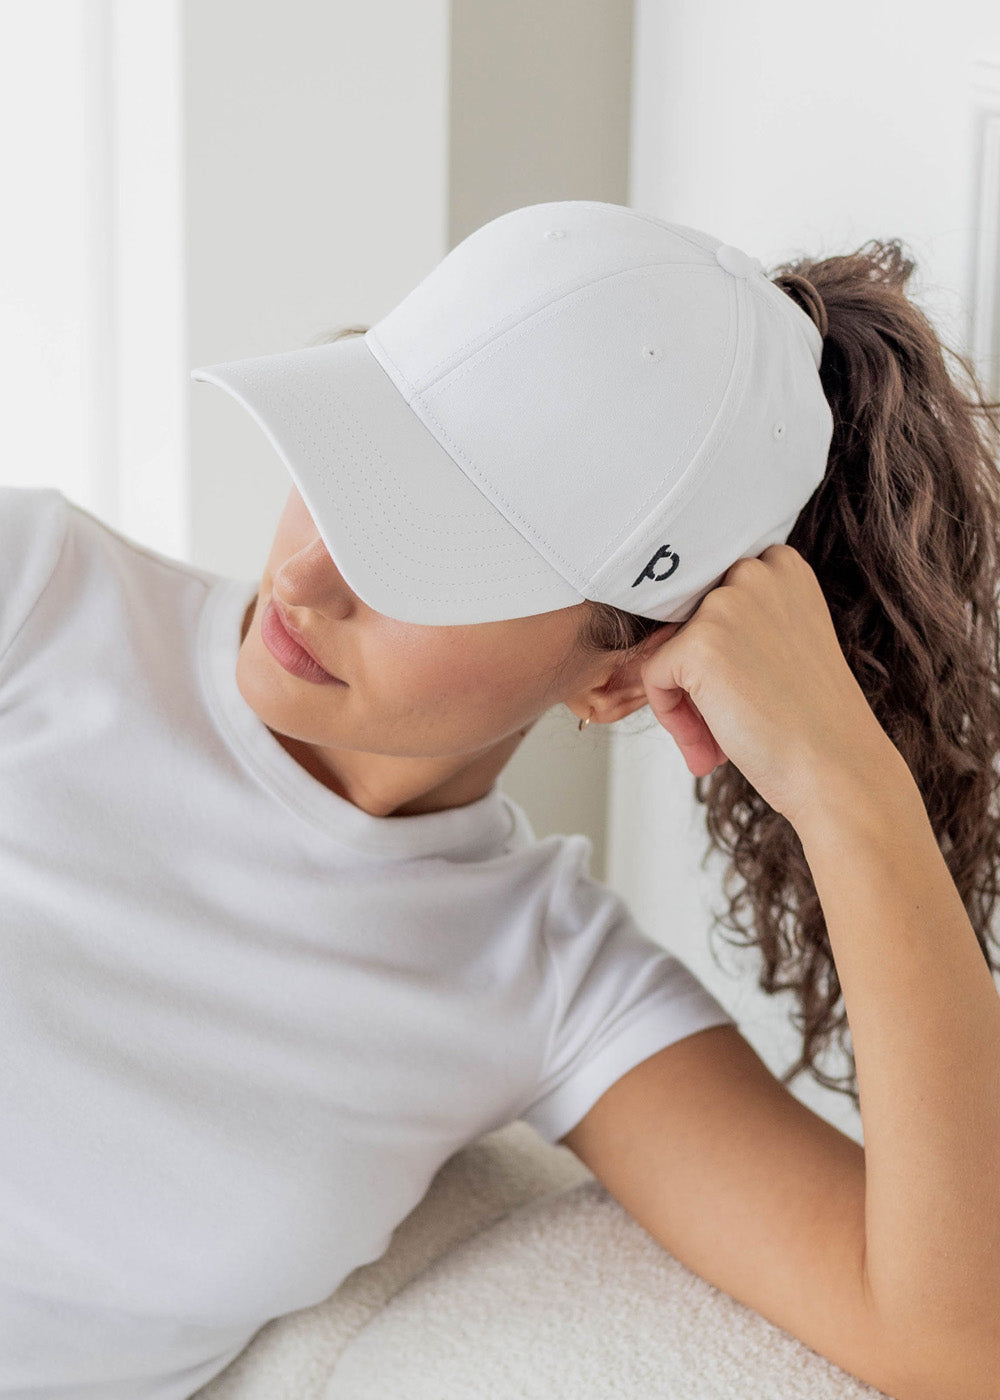 & fit You Ponytail Hats Ultimate Hair! to The Your Ponyback: Hat |